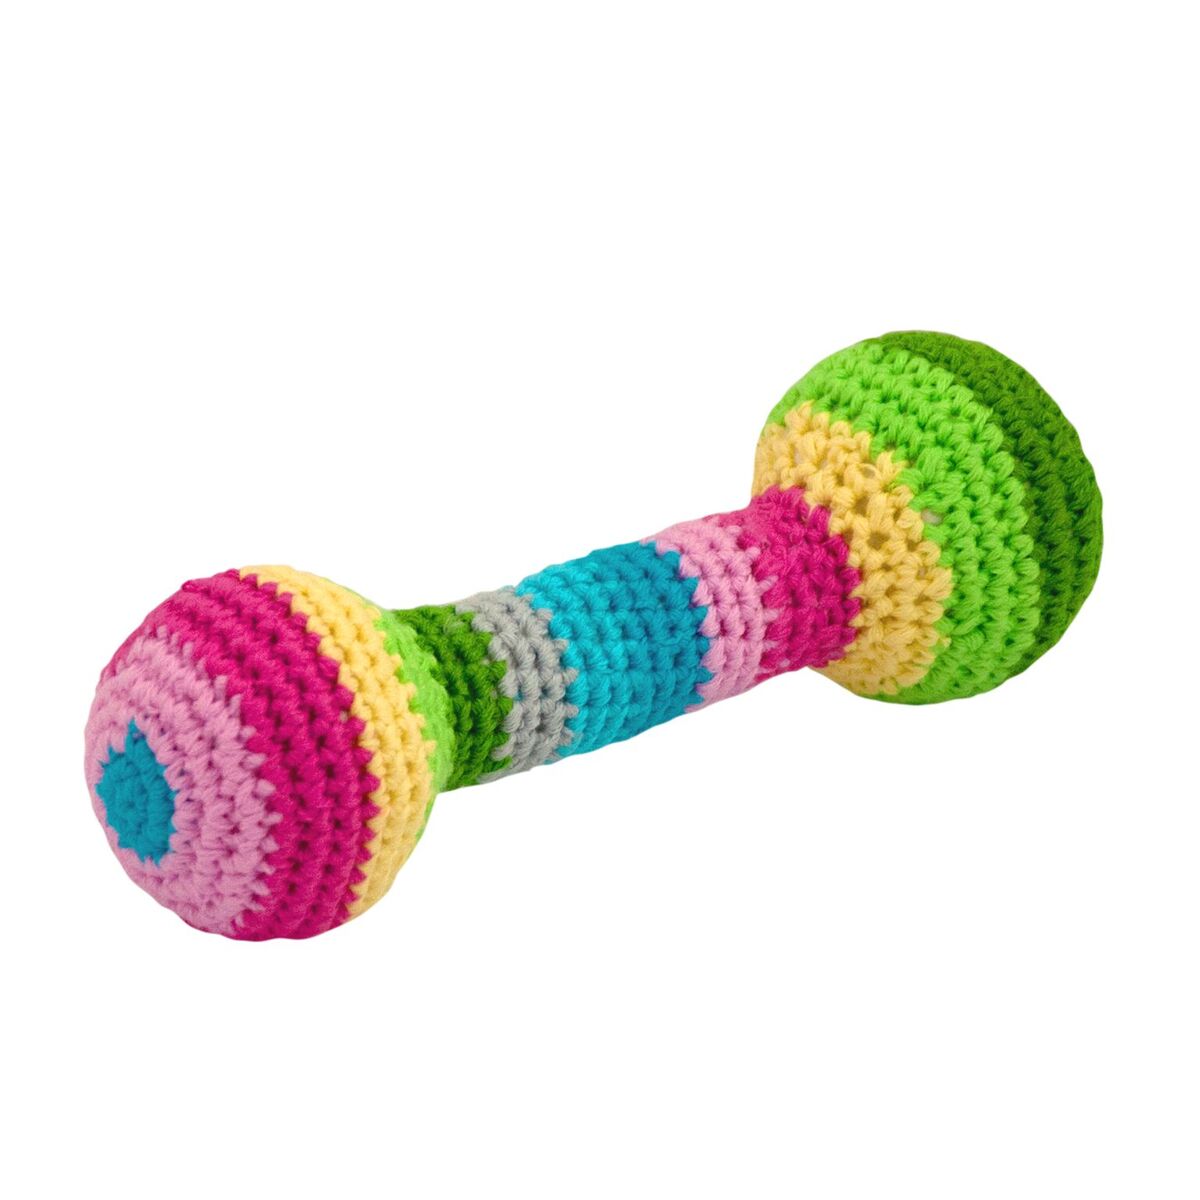 Natural Fiber Crocheted Chime Rattle - Crunch Natural Parenting is where to buy